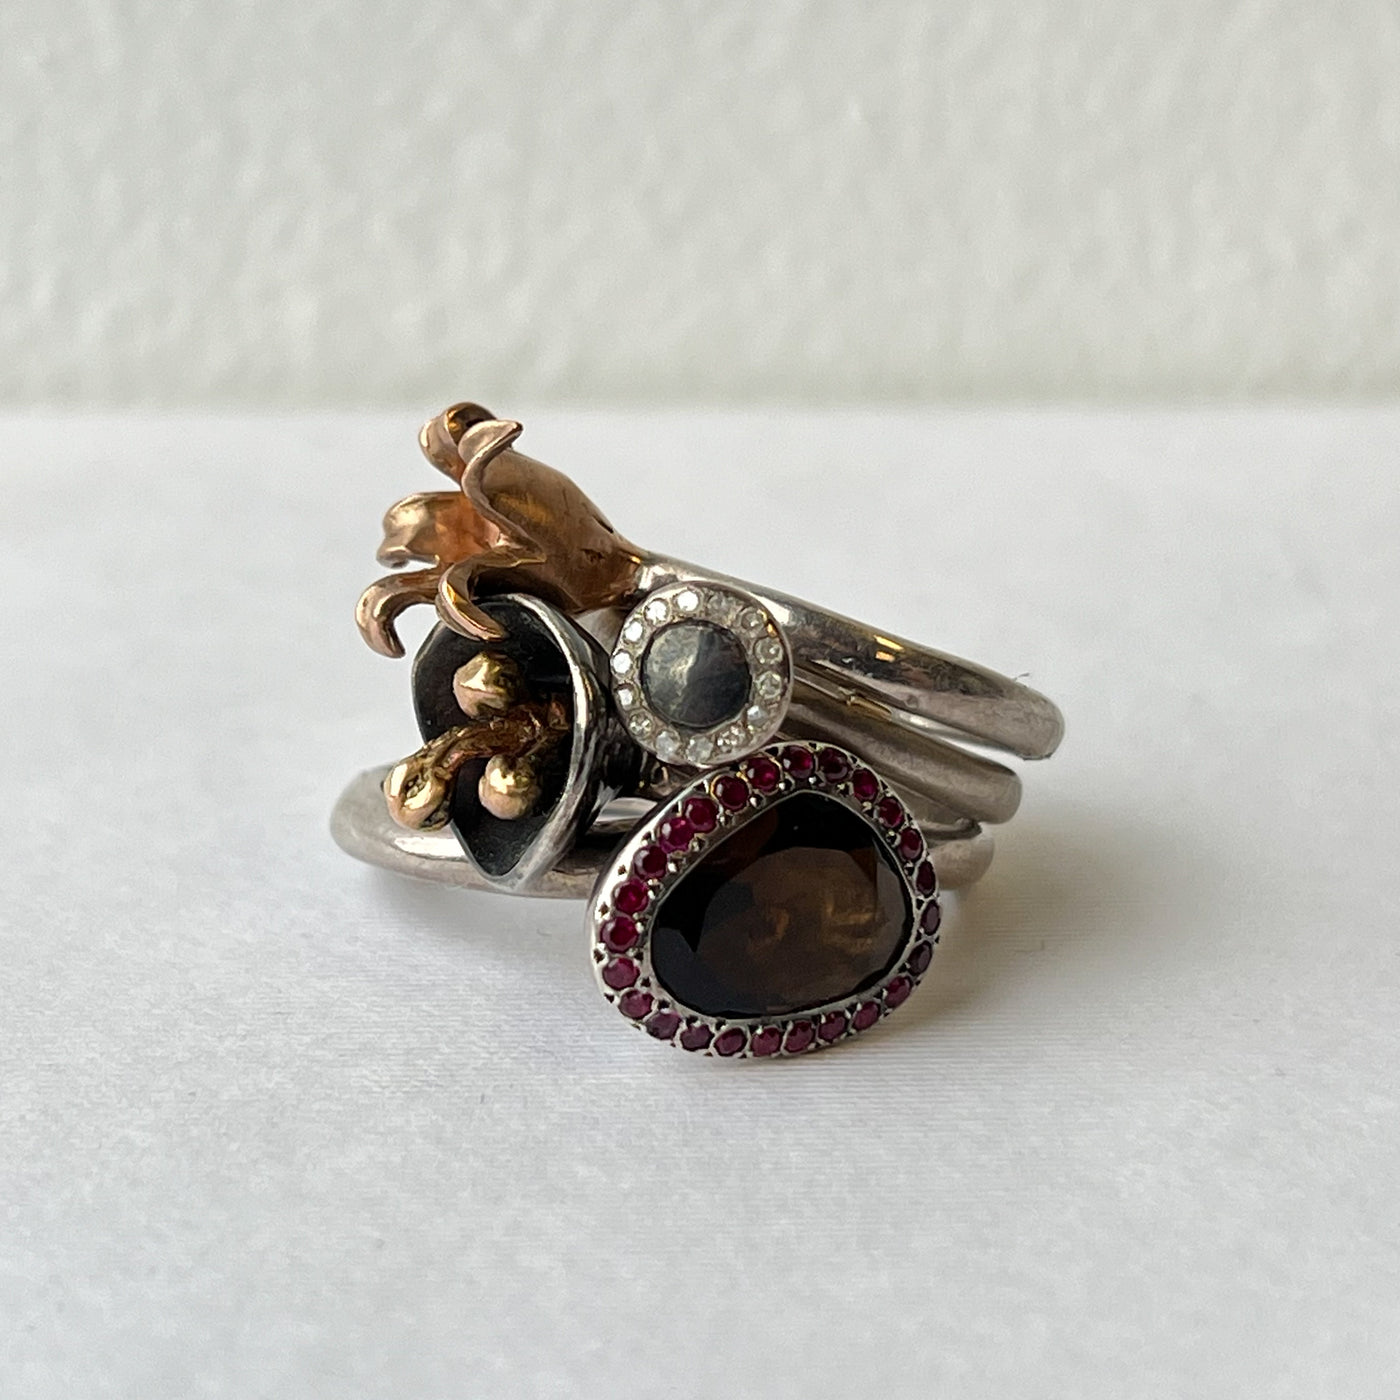 Rosa Maria Silver Ring with Quartz and Rubies - Discounts on Rosa Maria at UAL